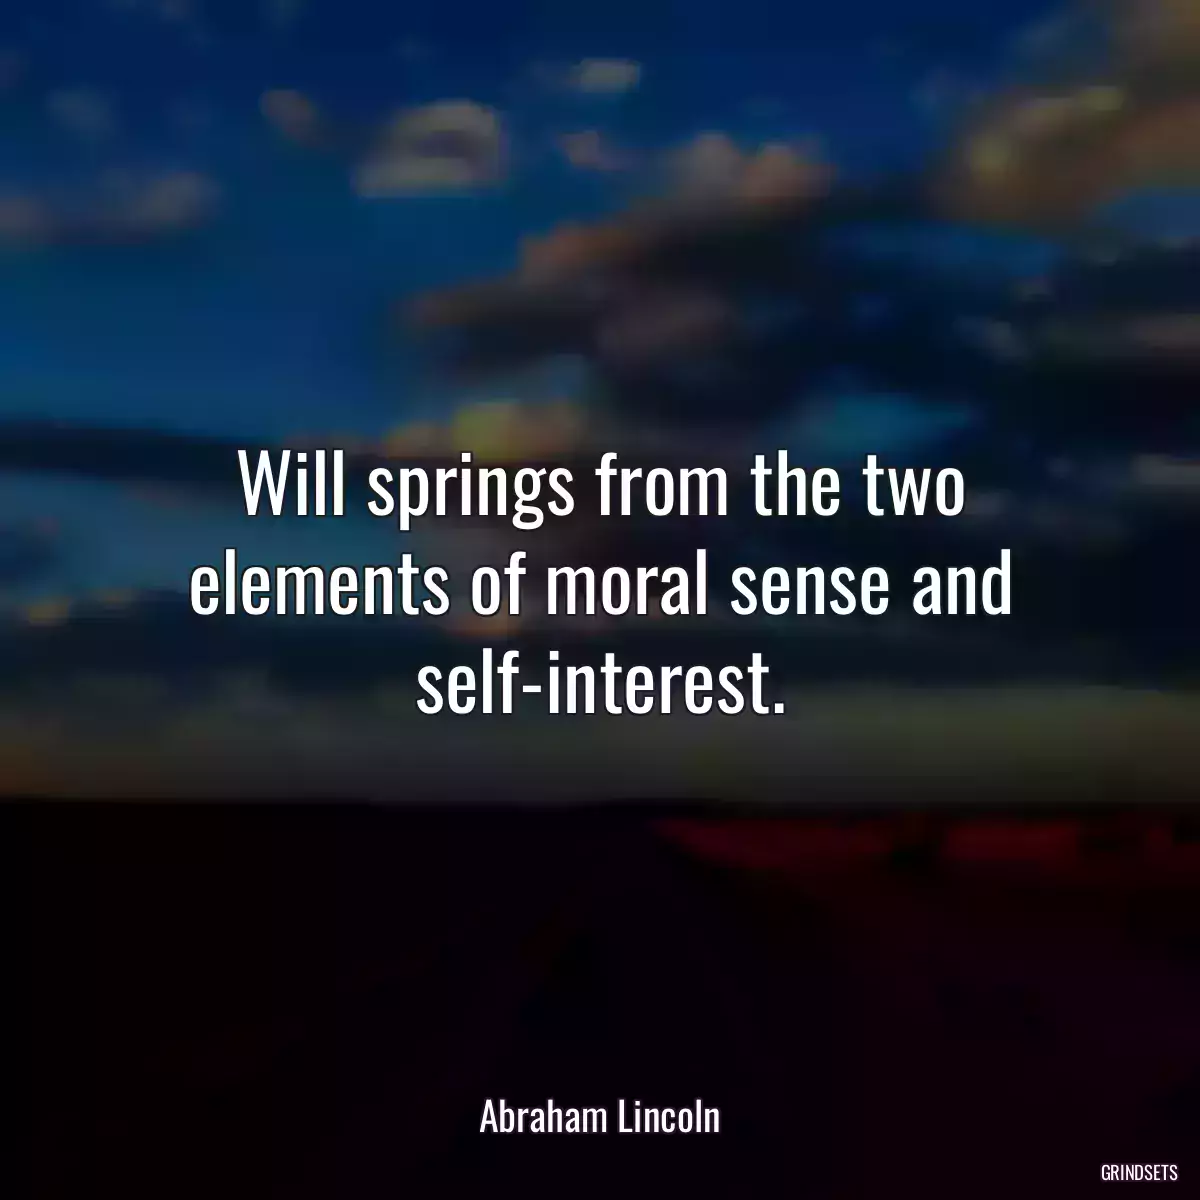 Will springs from the two elements of moral sense and self-interest.